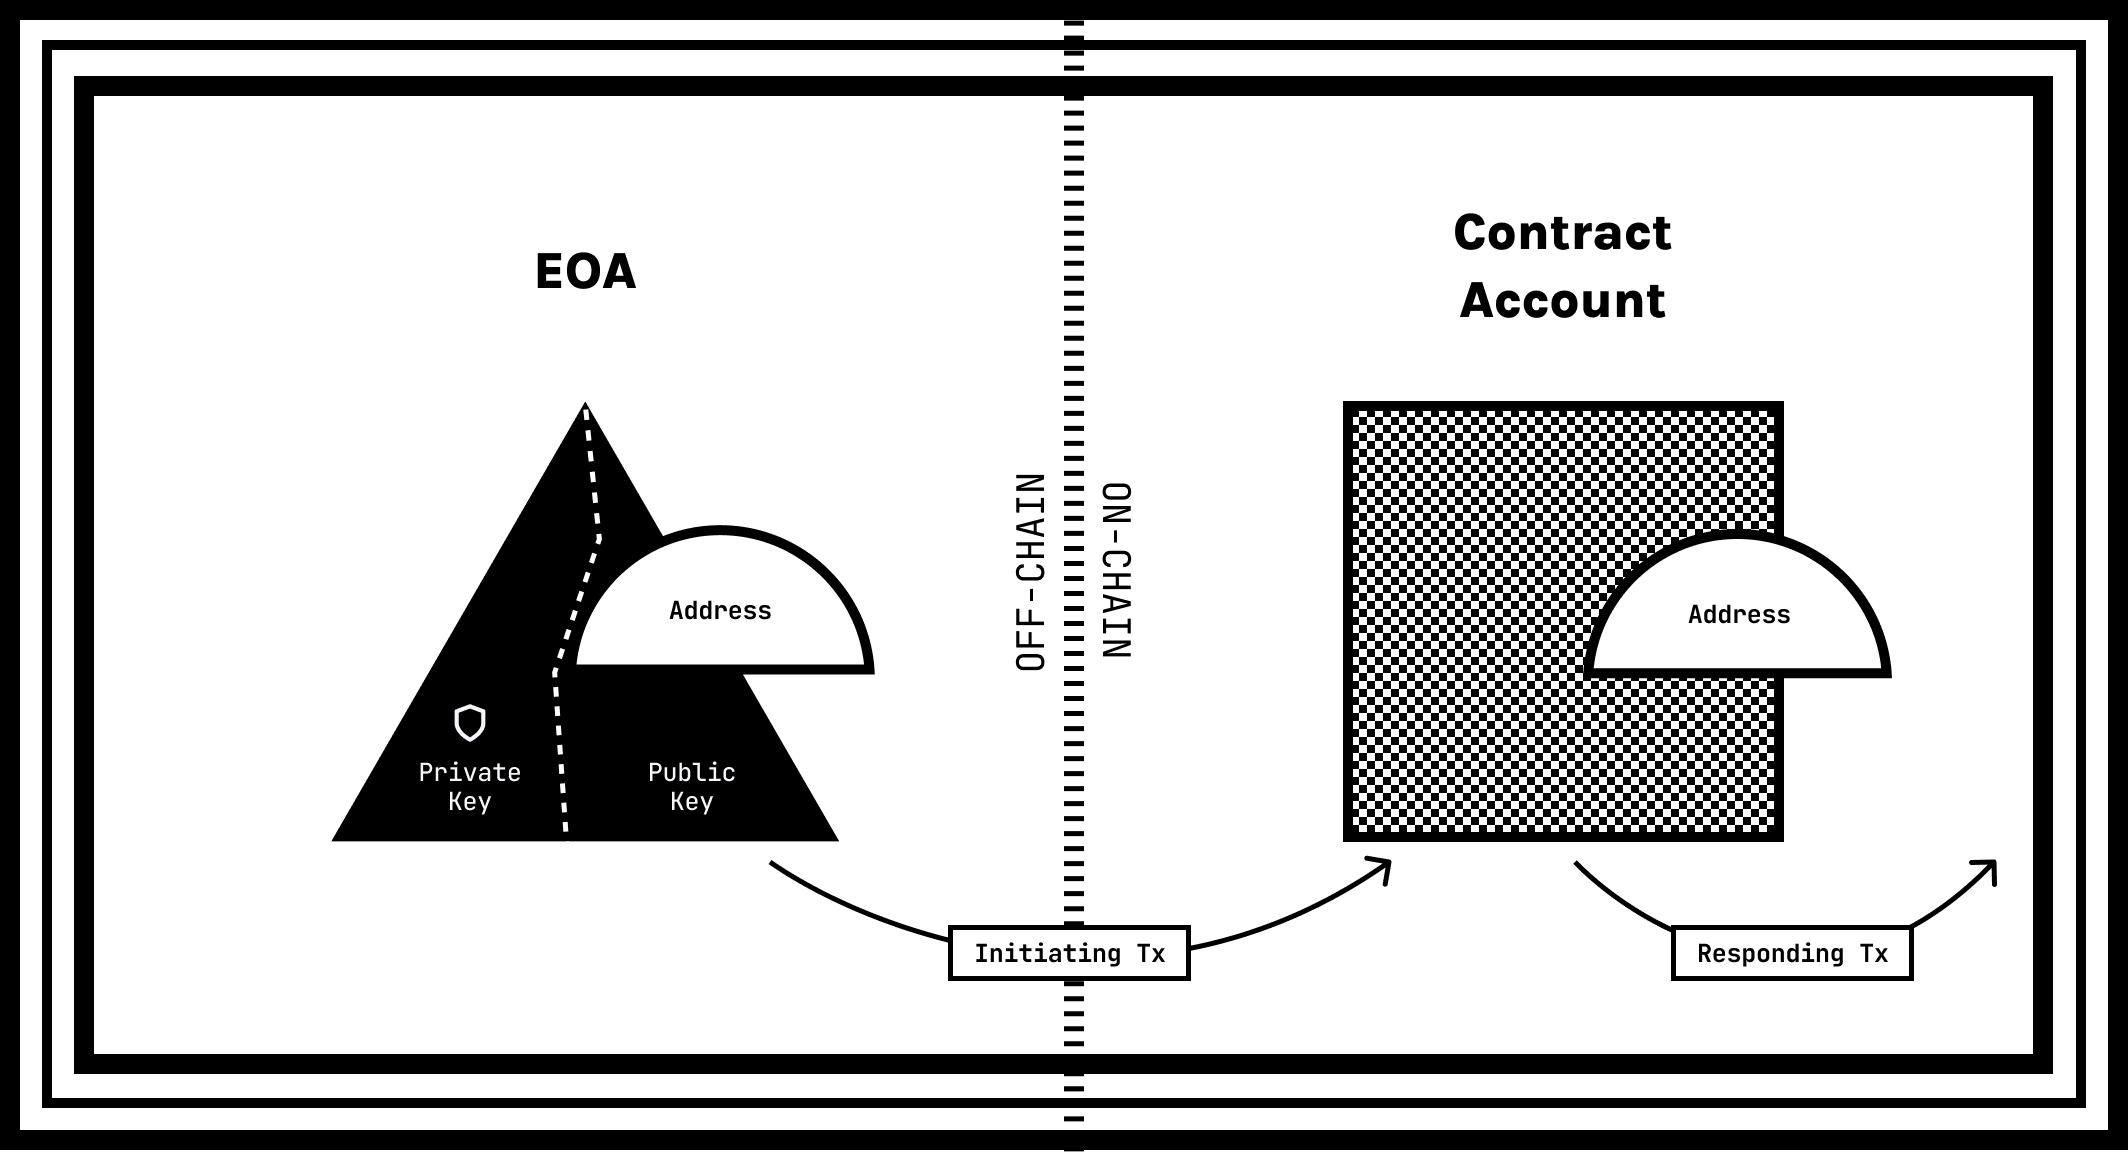 Differences between EOAs and Contract Accounts